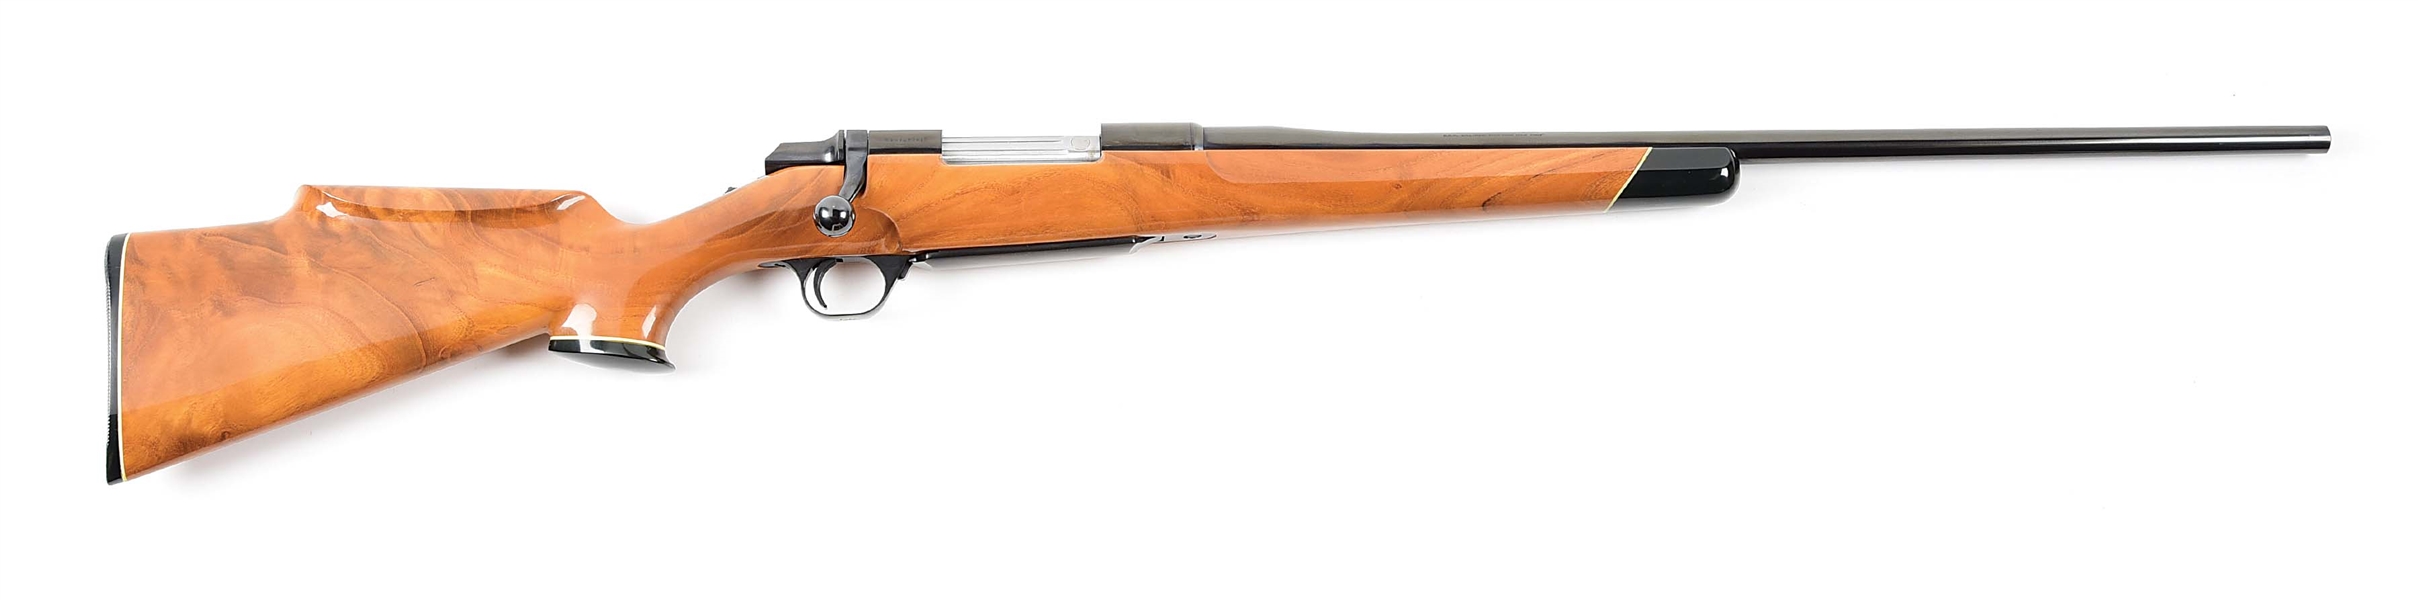 (M) BROWNING BBR BOLT ACTION RIFLE WITH MULBERRY STOCK.